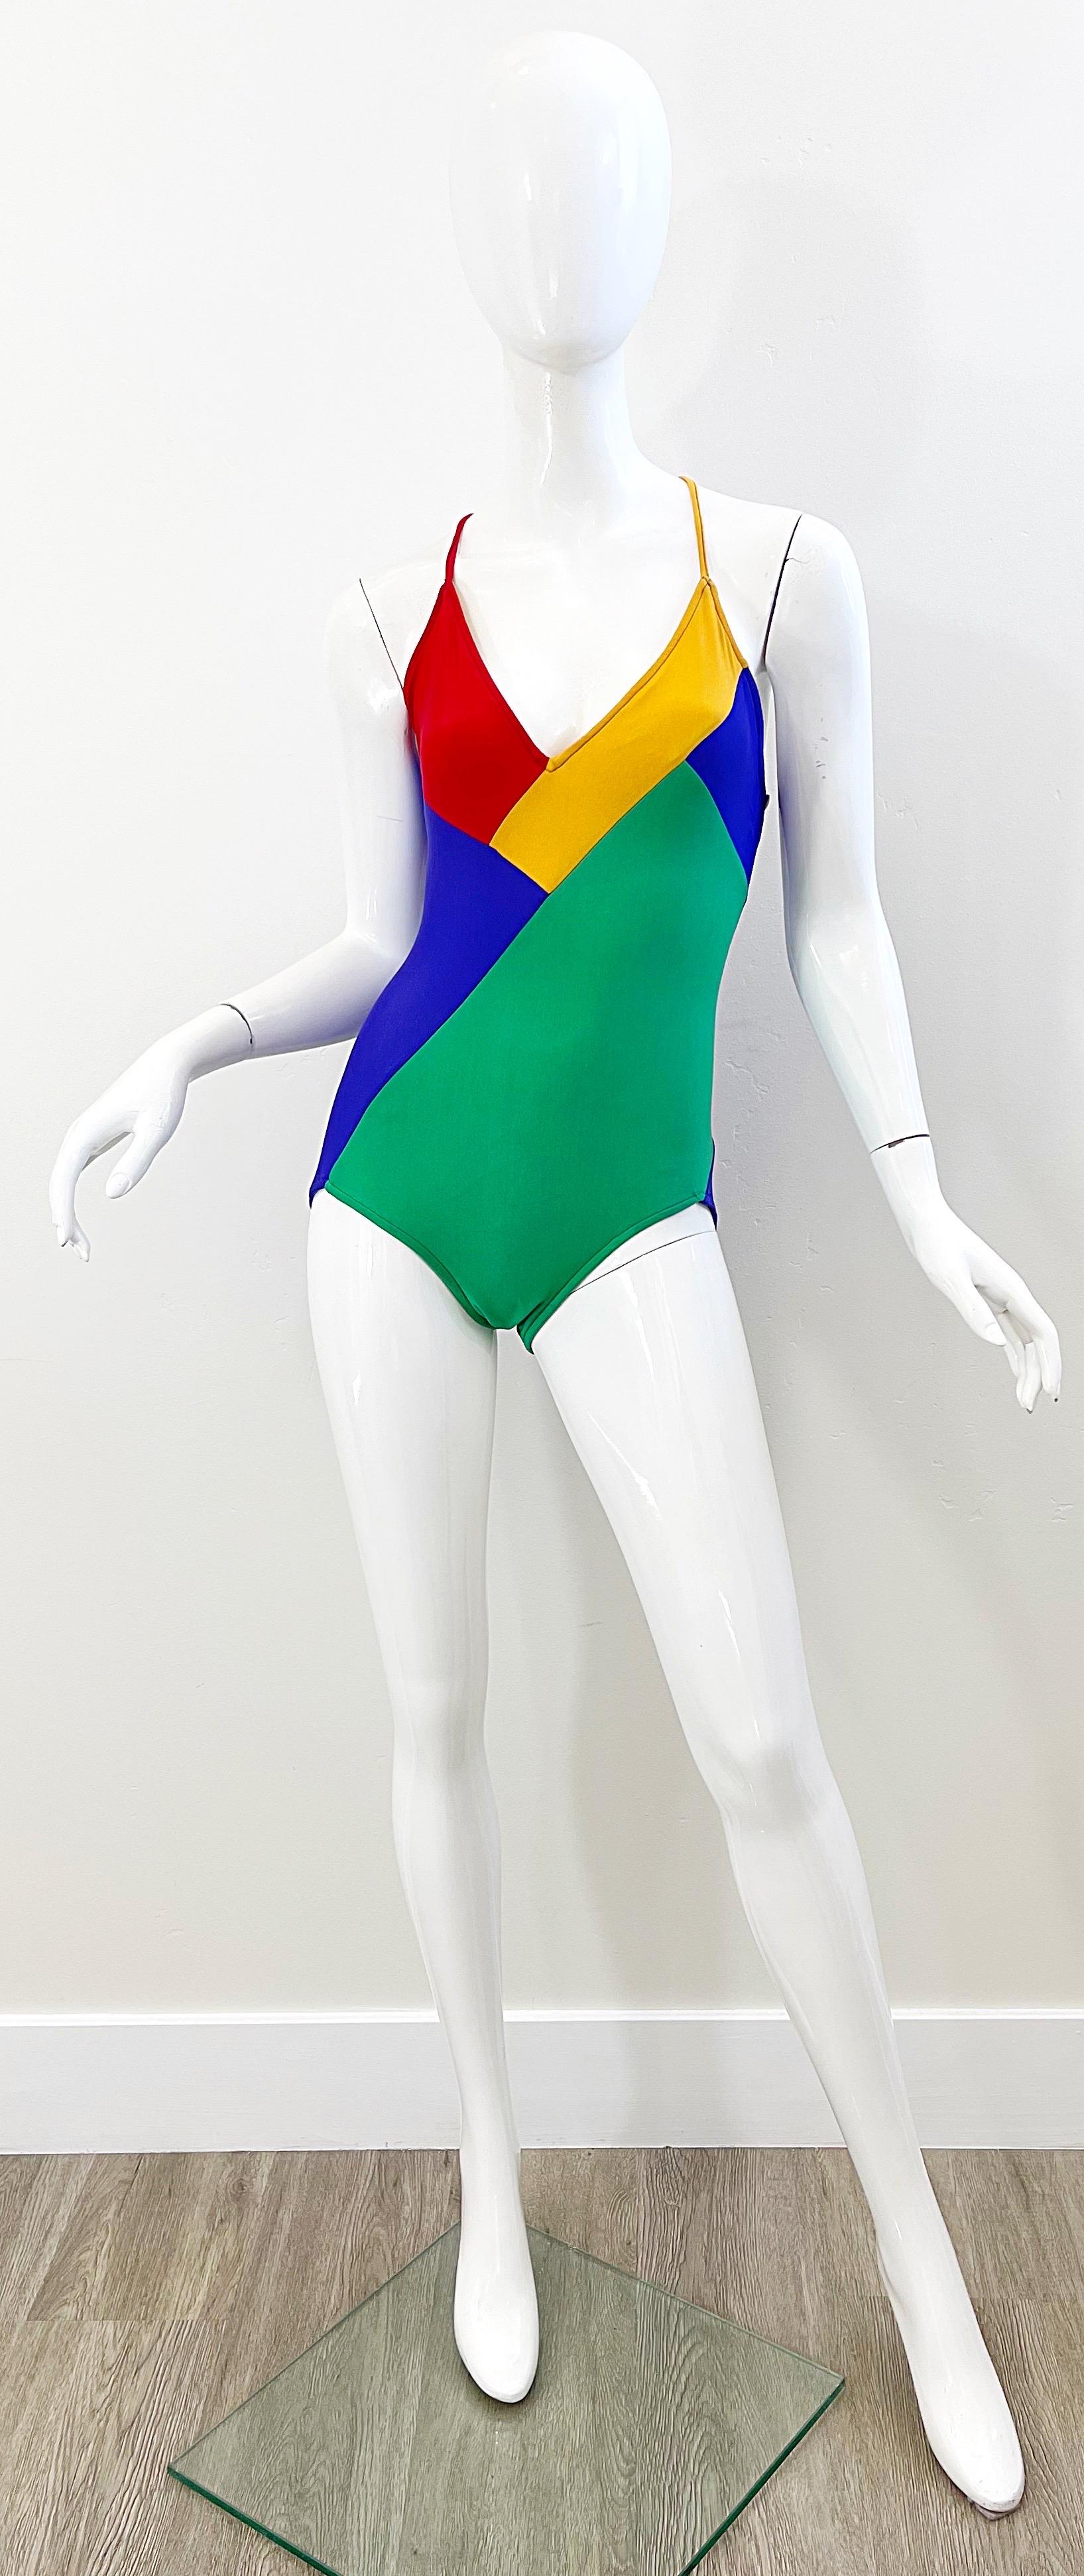 Sexy 70s GIORGIO di SANT ANGELO color block one piece halter swimsuit or bodysuit! Features vibrant colors of green, marigold yellow, red, and royal blue. Criss-cross ties in the back are adjustable. 
Great for the pool, beach, yacht, or tucked in